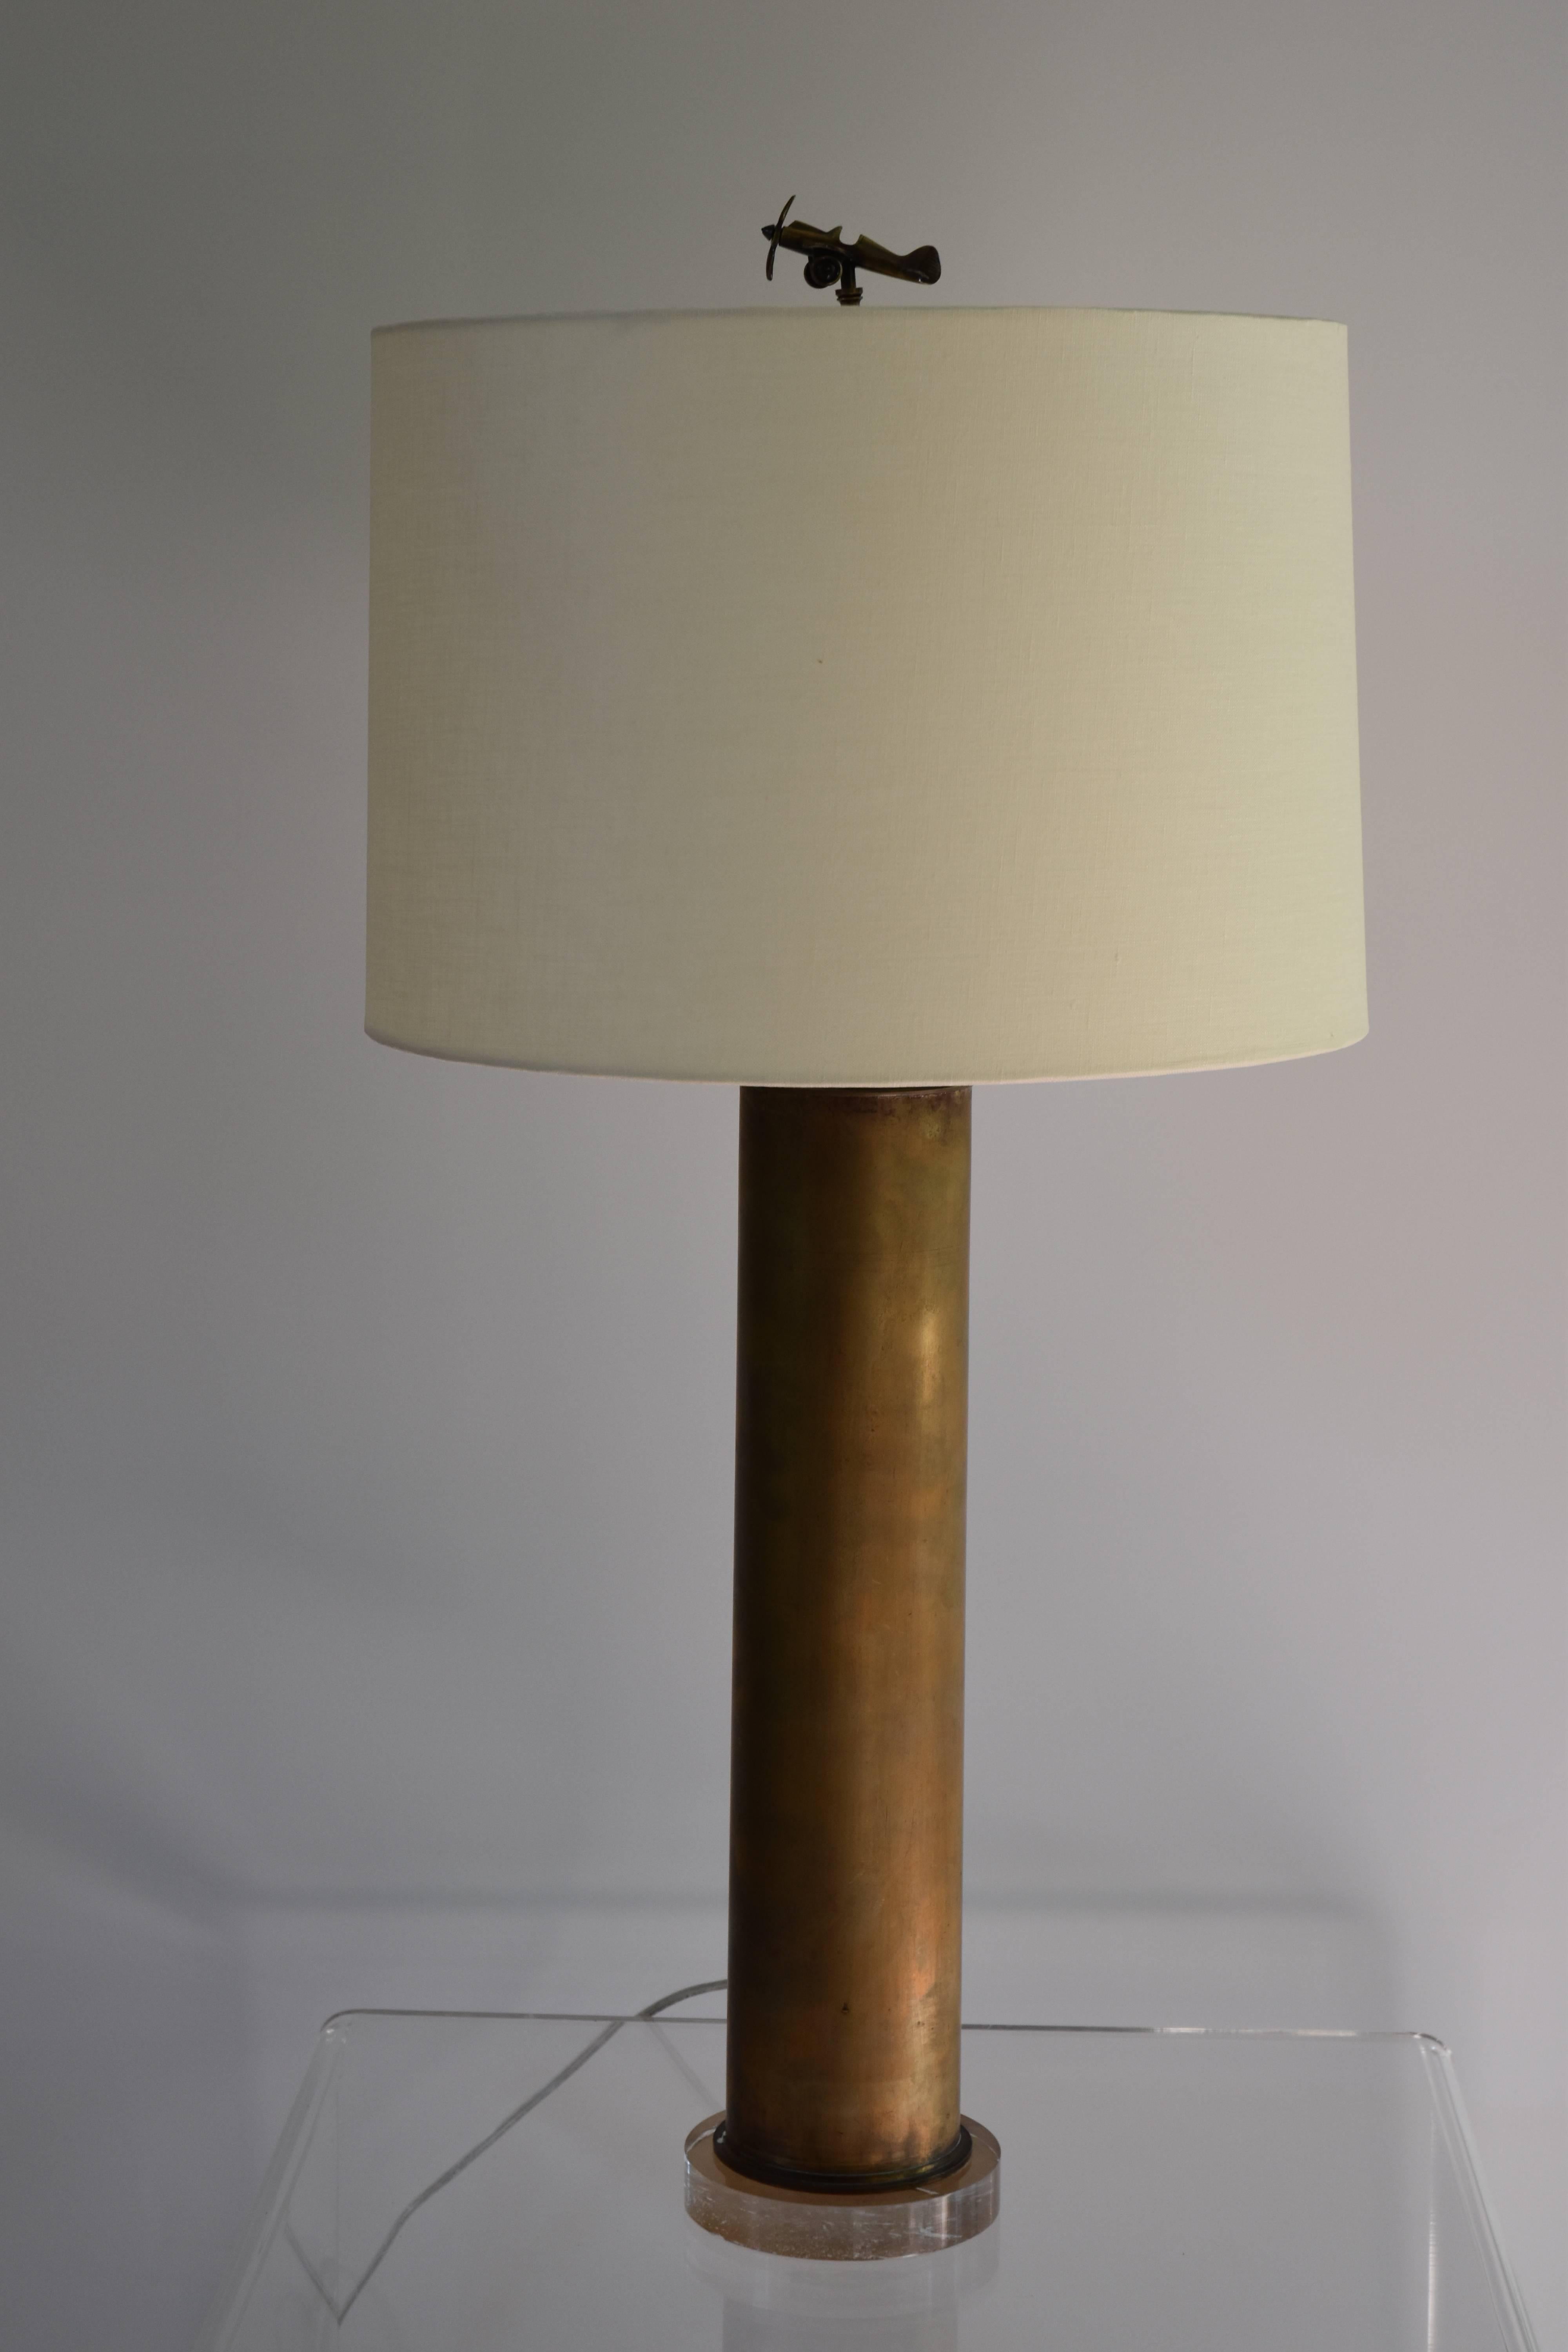 A vintage brass shell casing mounted as a lamp on a lucite base with a whimsical airplane finial. 